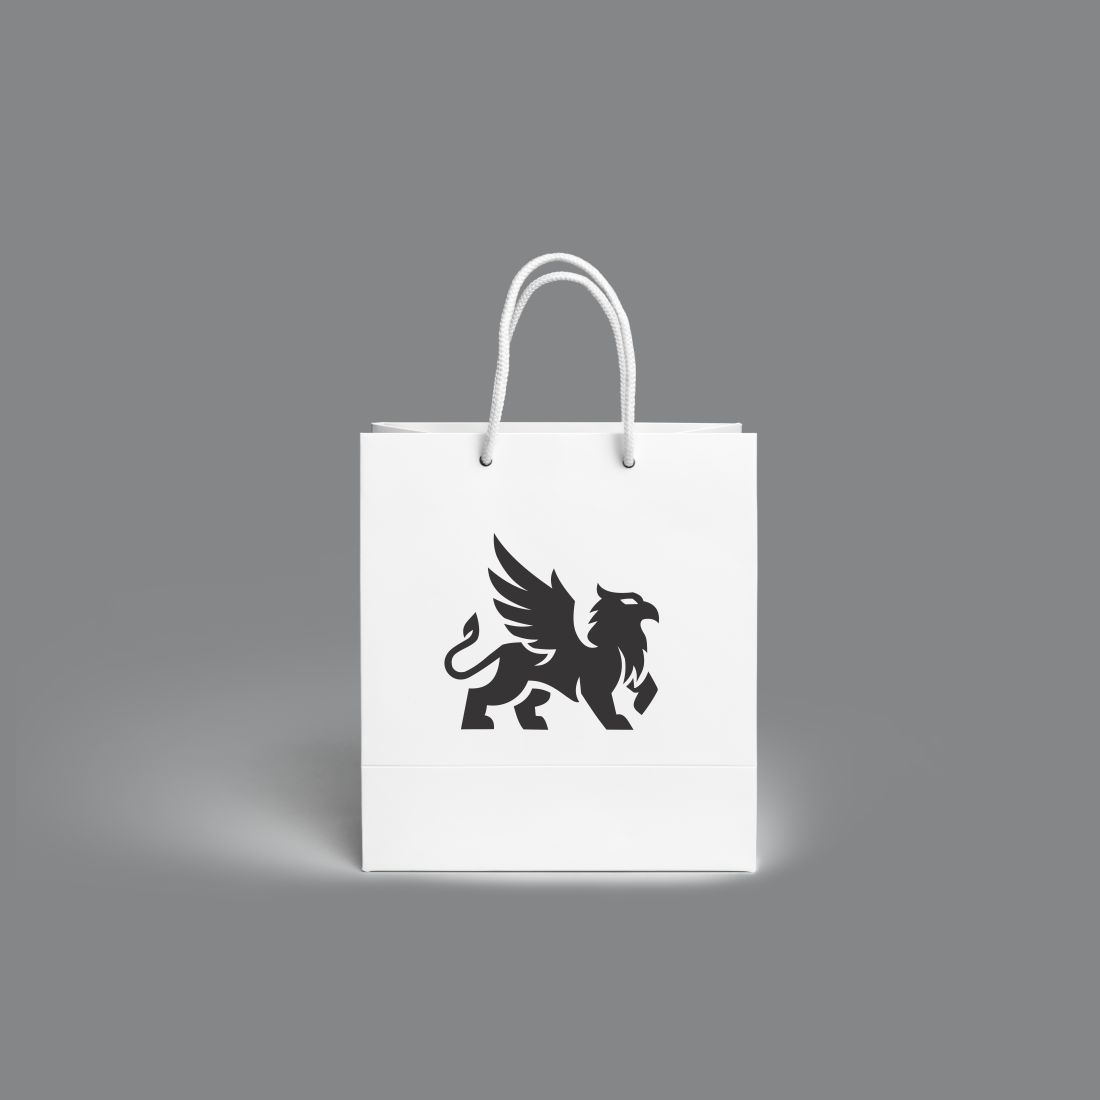 gryphon financial griffin logo4 981